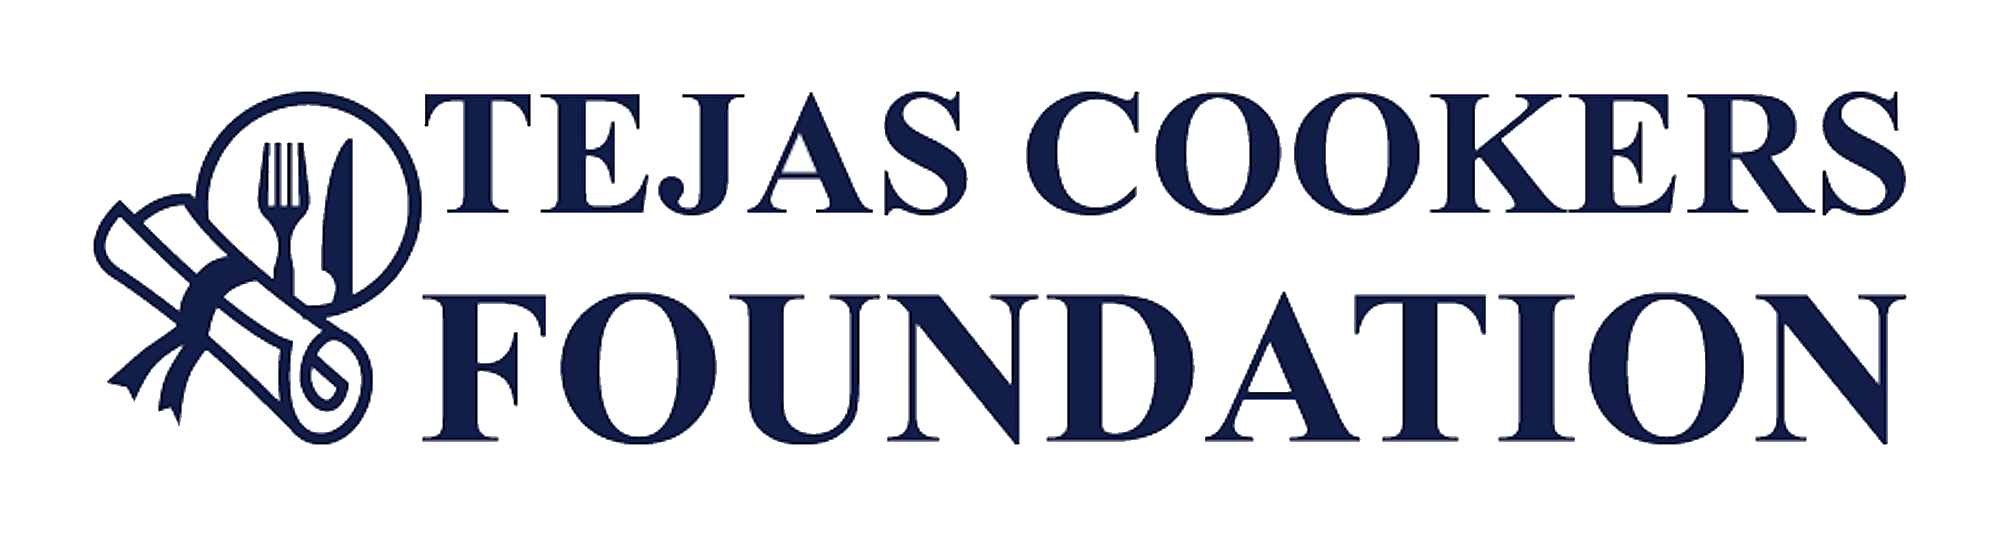 Tejas Cookers Foundation